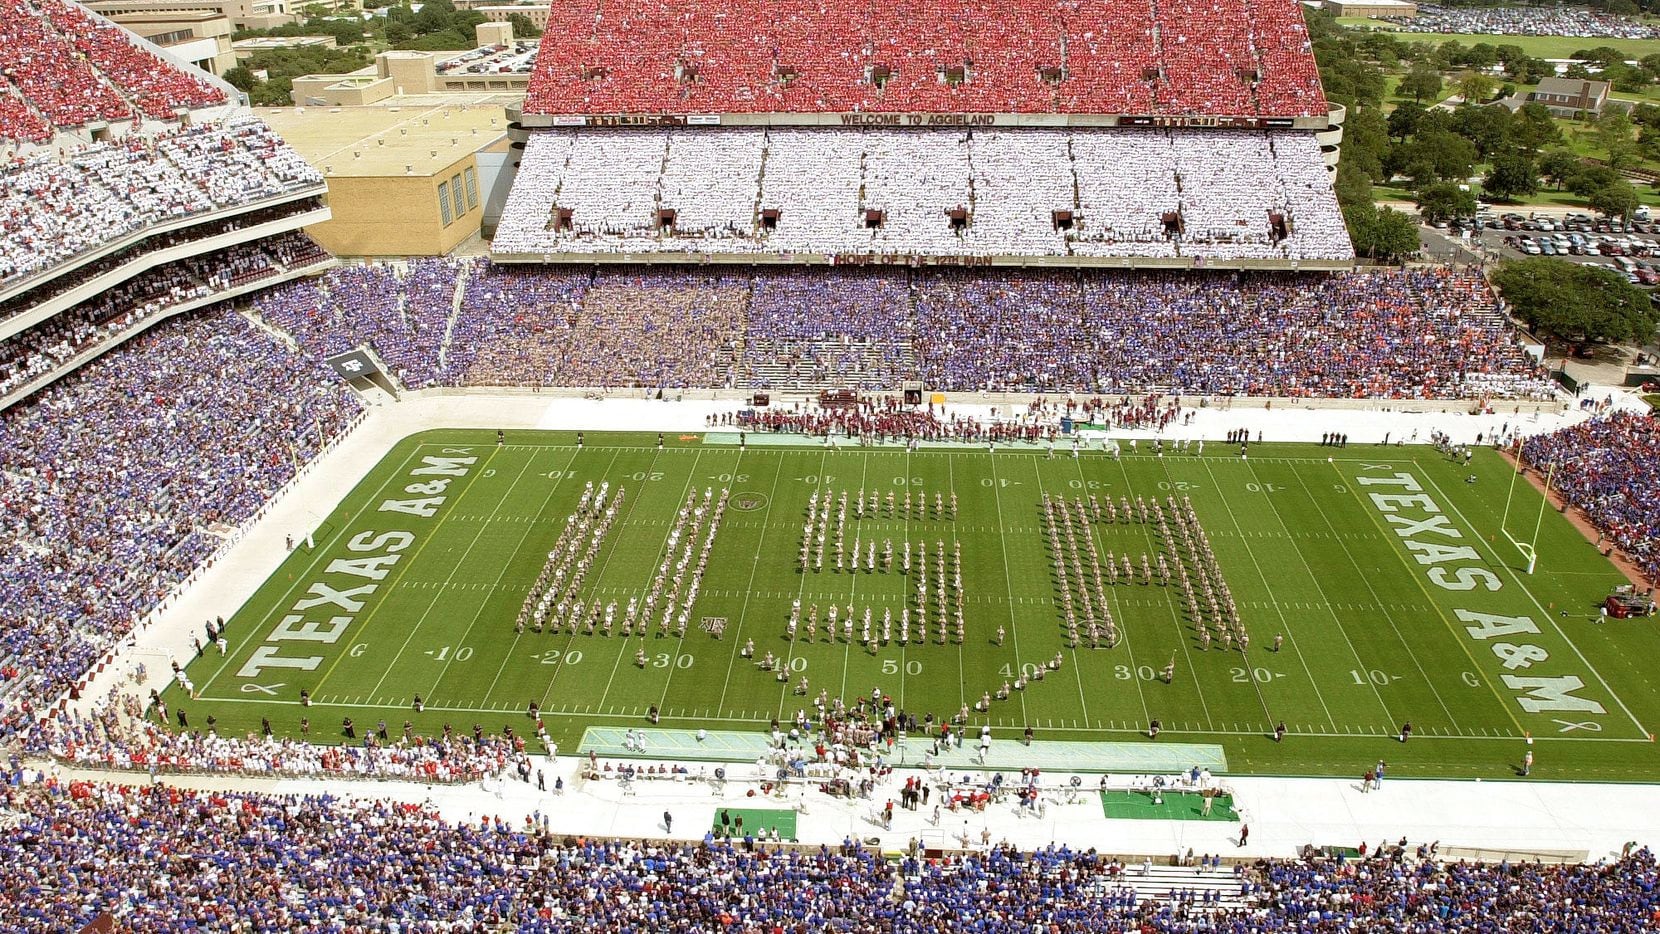 The Texas A&M band forms a "USA as fan in College Station sports red, white and blue T-shirts. Shirt sales to Saturday's crowd of 82,601, raised more than $150,000 was donated to the New York Fire Department.